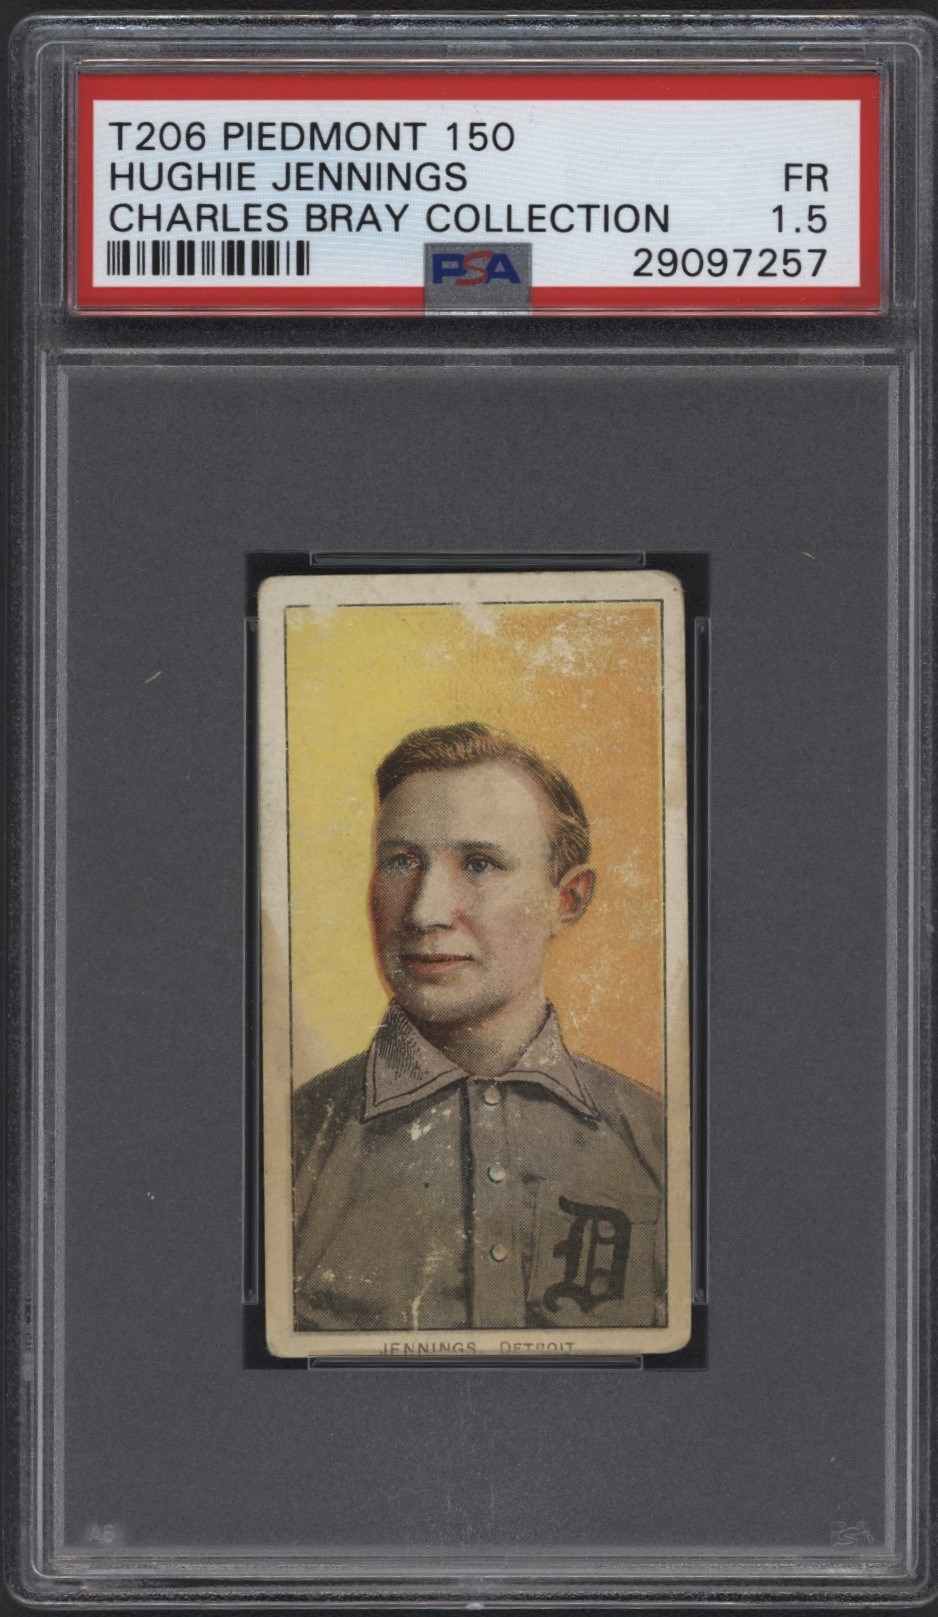 Baseball and Trading Cards - T206 Piedmont 150 Hughie Jennings Portrait PSA 1.5 From the Charles Bray Collection